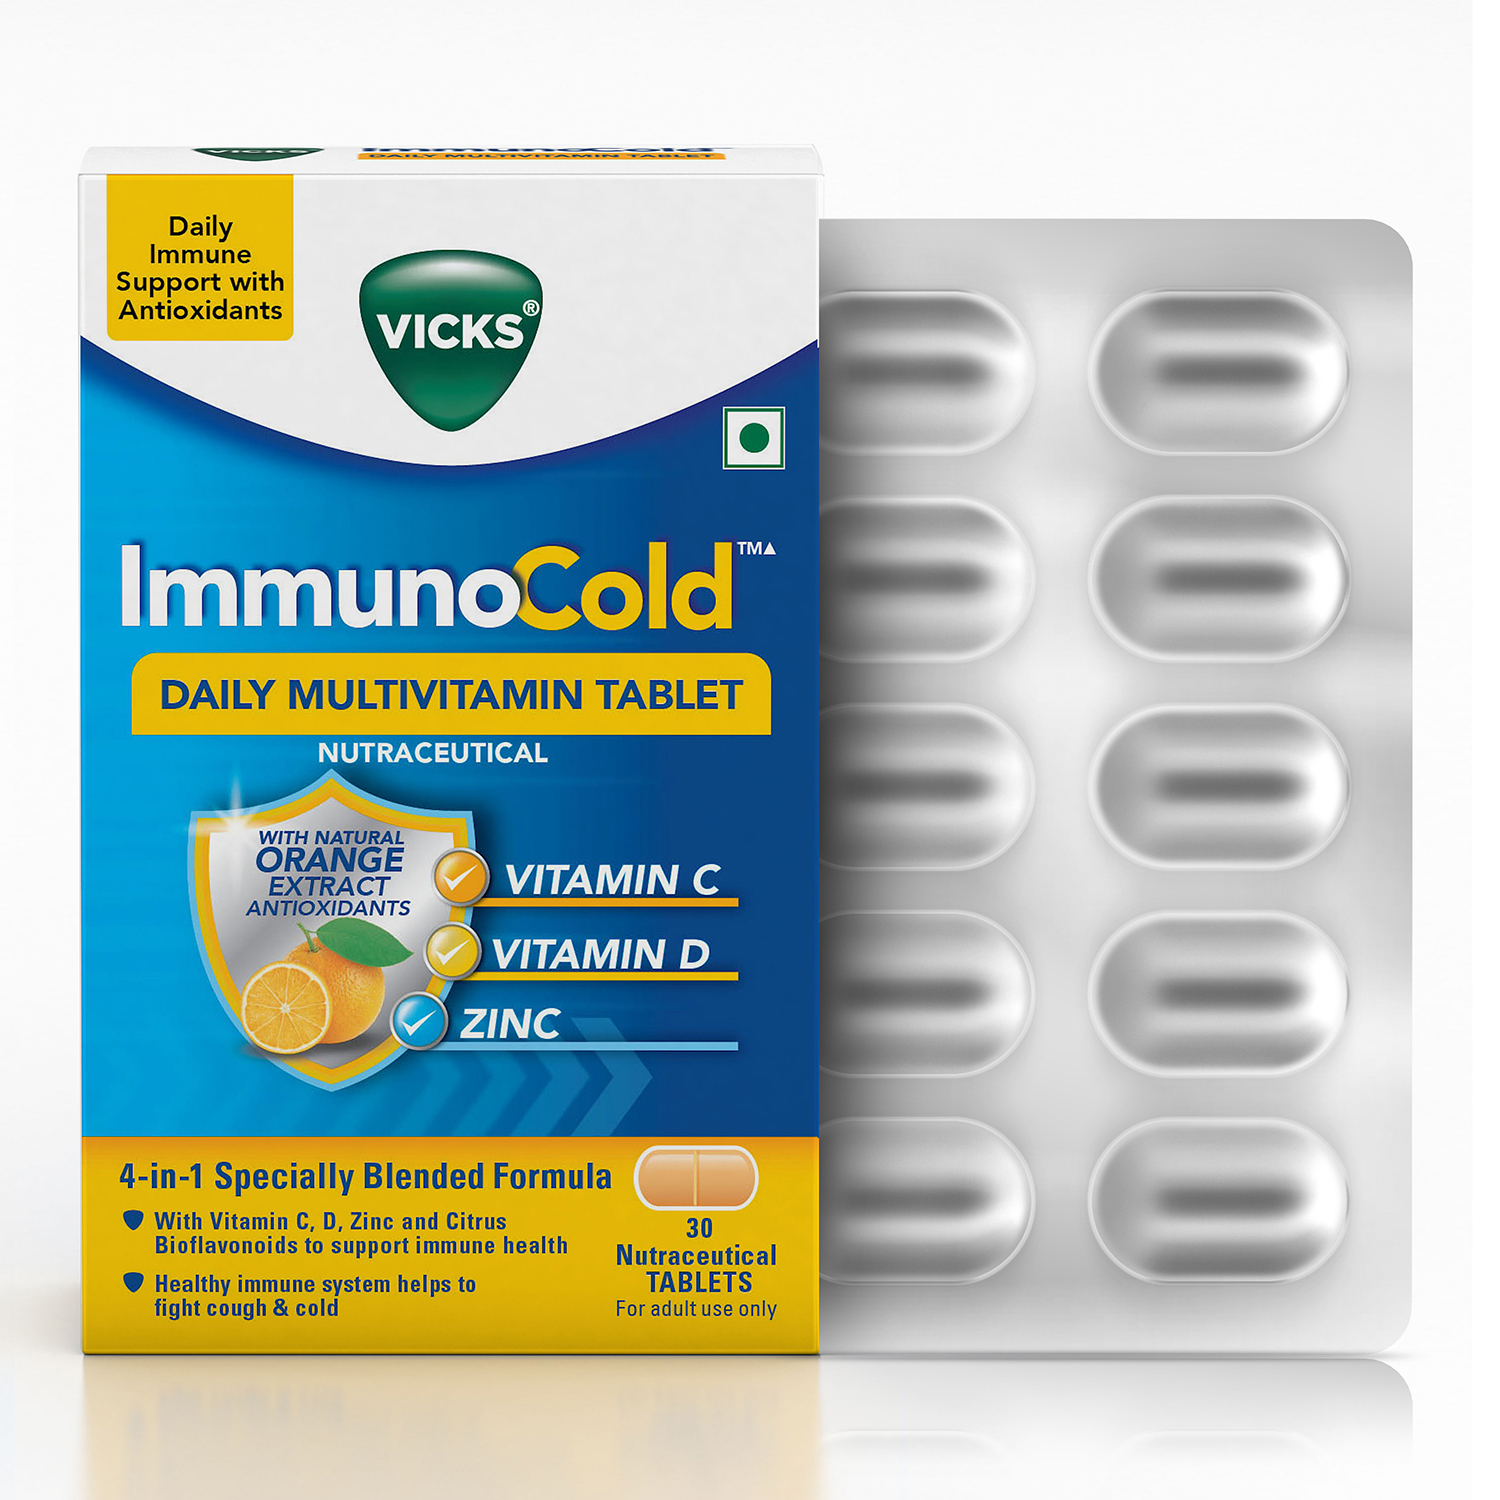 Vicks ImmunoCold 30s Pack, Daily MultiVitamin Tablet, Immunity from Cough & Cold